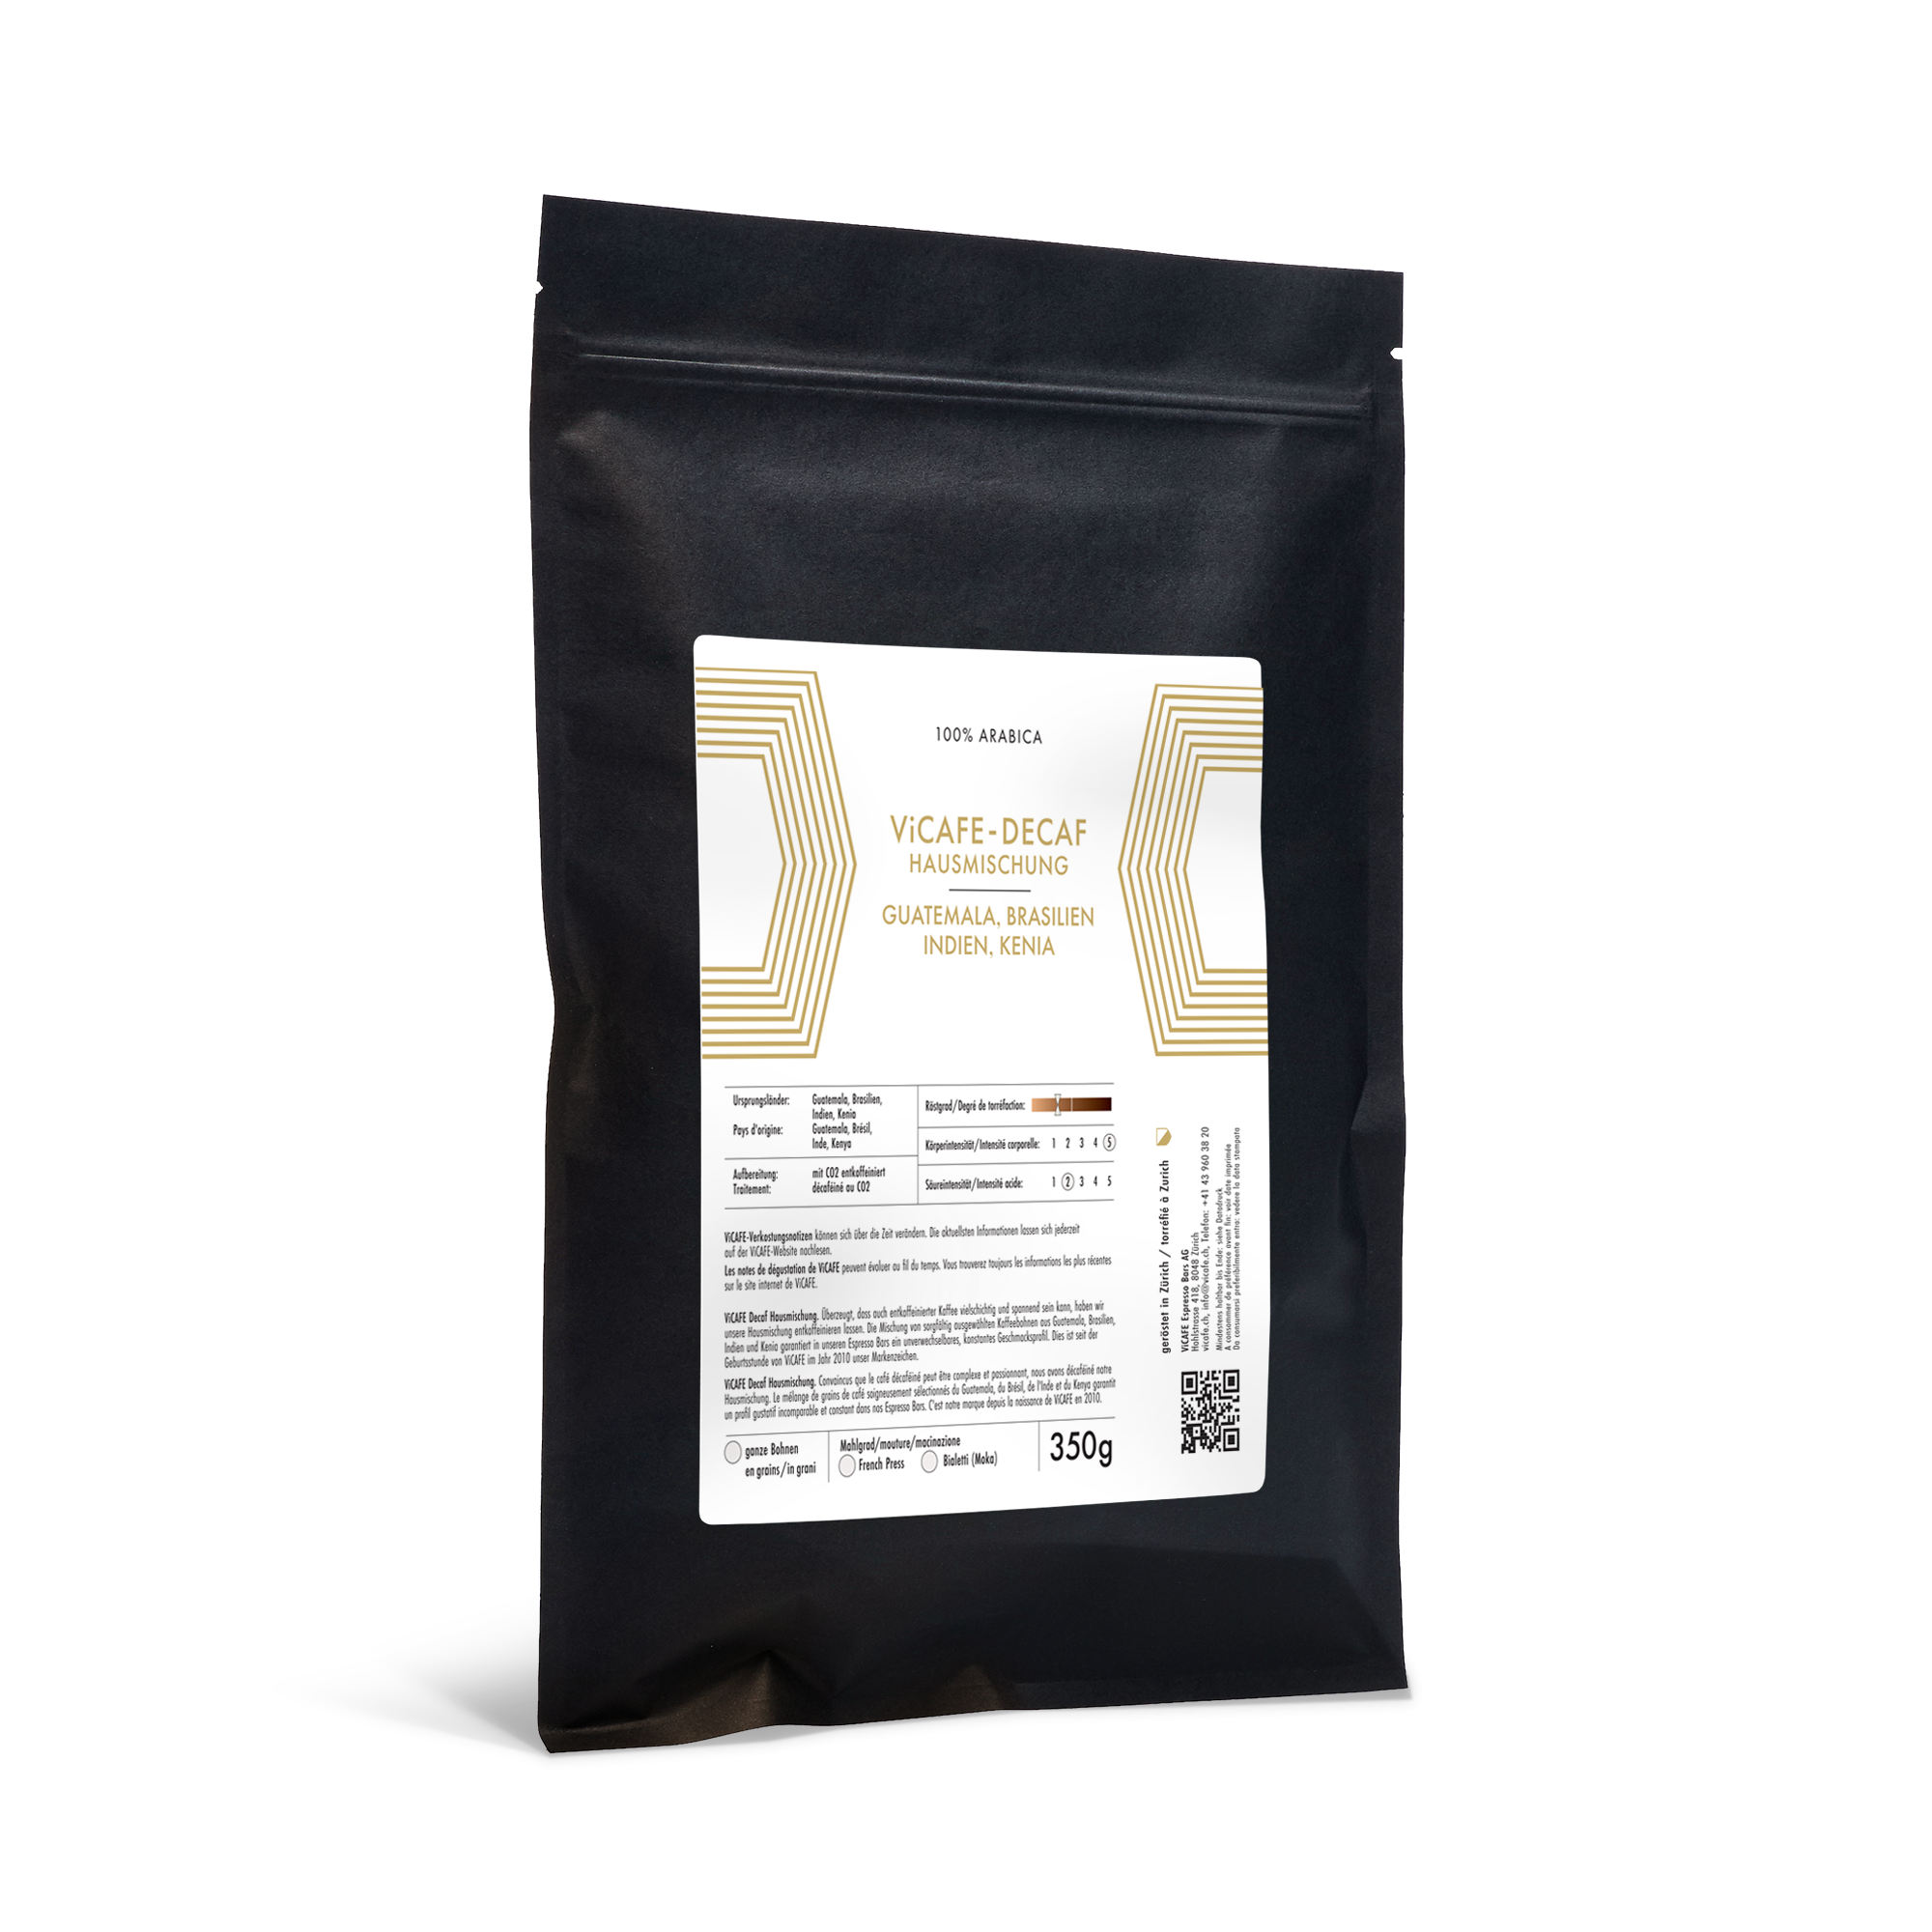 ViCAFE Decaf Hausmischung Coffee Subscription